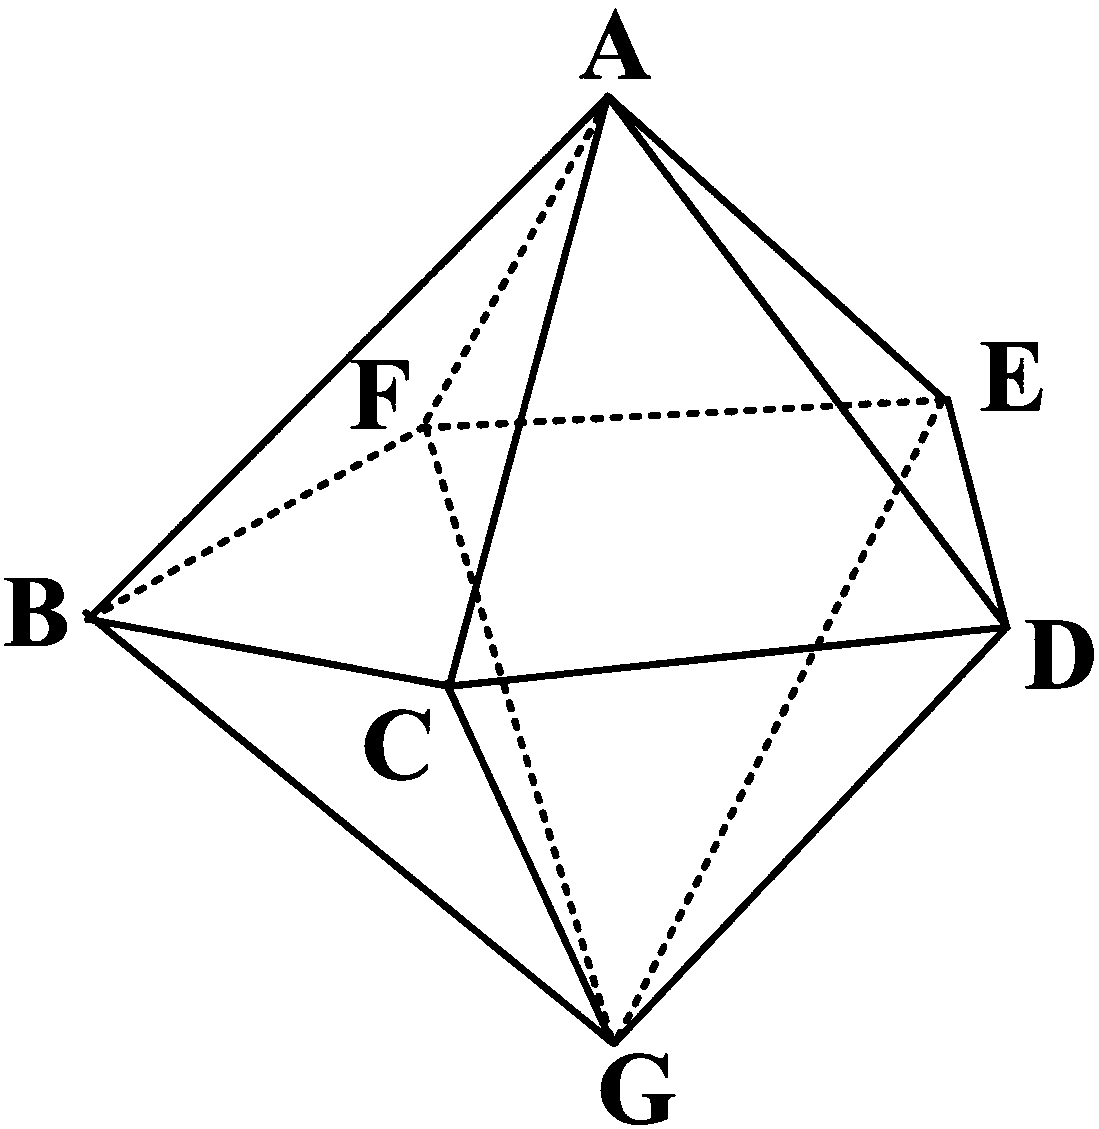 Pentagonal double-cone symmetrical coupling mechanism with single-degree-of-freedom movement